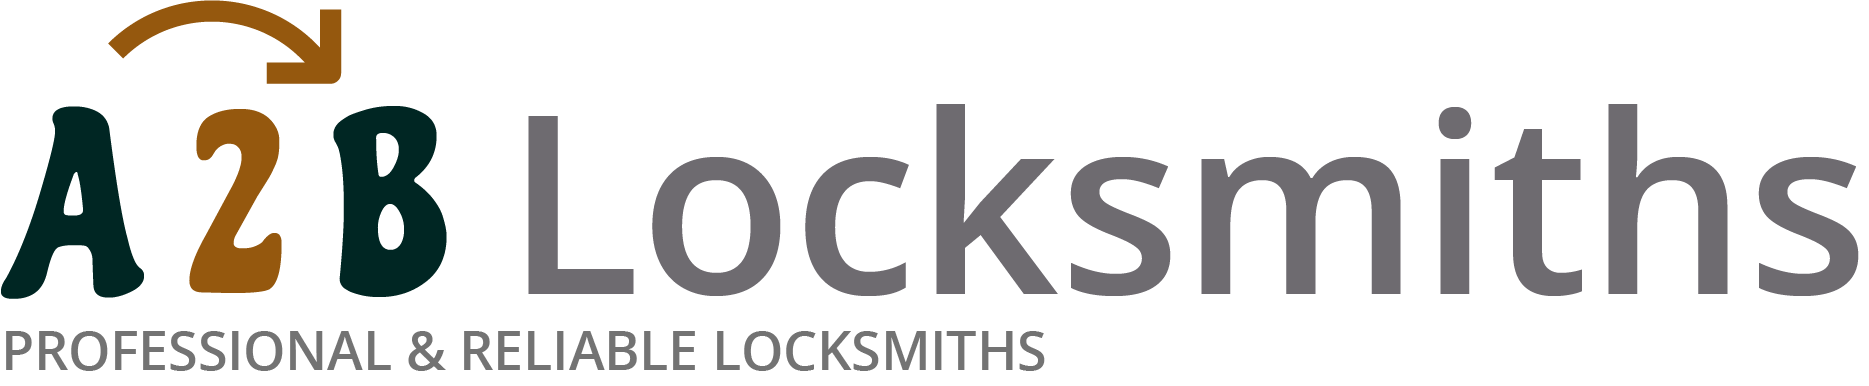 If you are locked out of house in Bermondsey, our 24/7 local emergency locksmith services can help you.